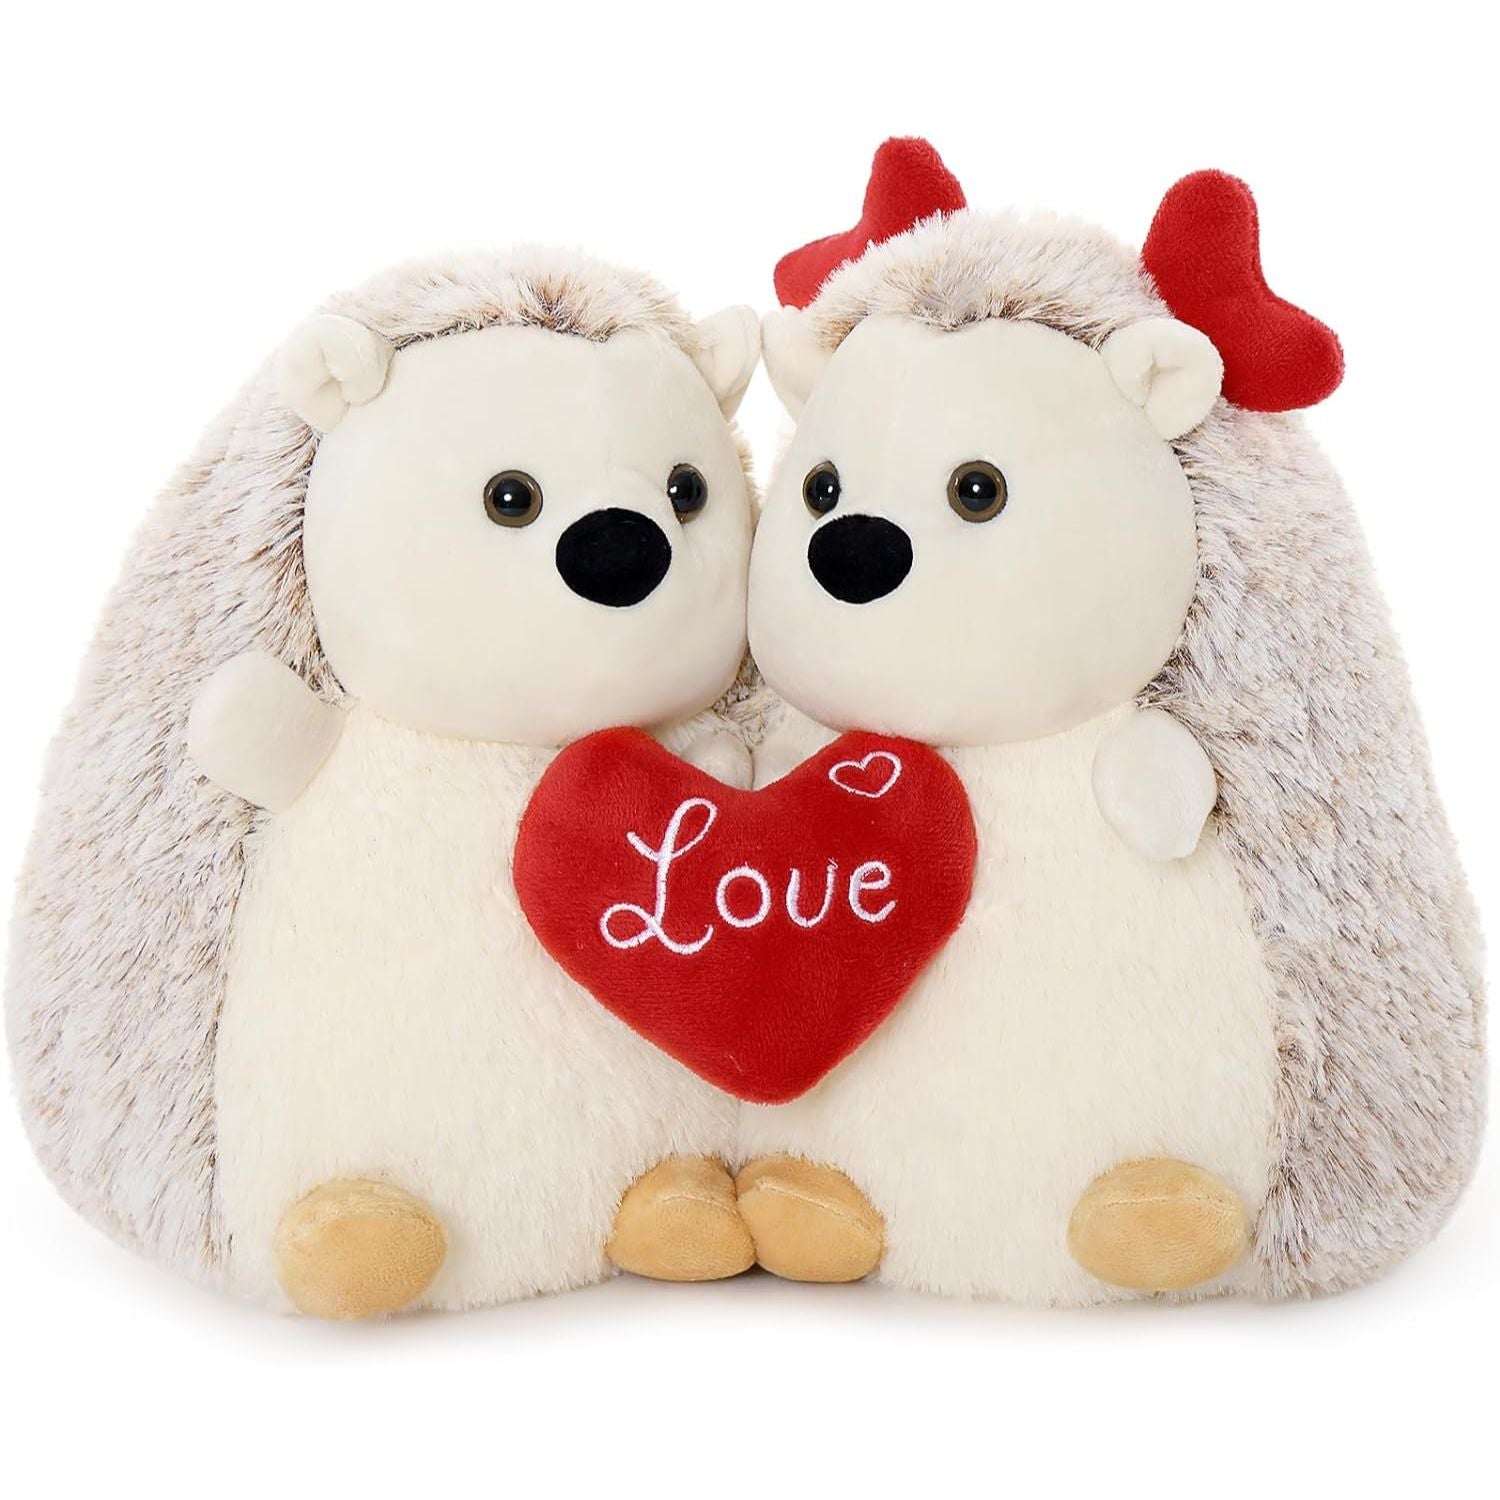 Adorable Hedgehog Plush Toy, 12 Inches